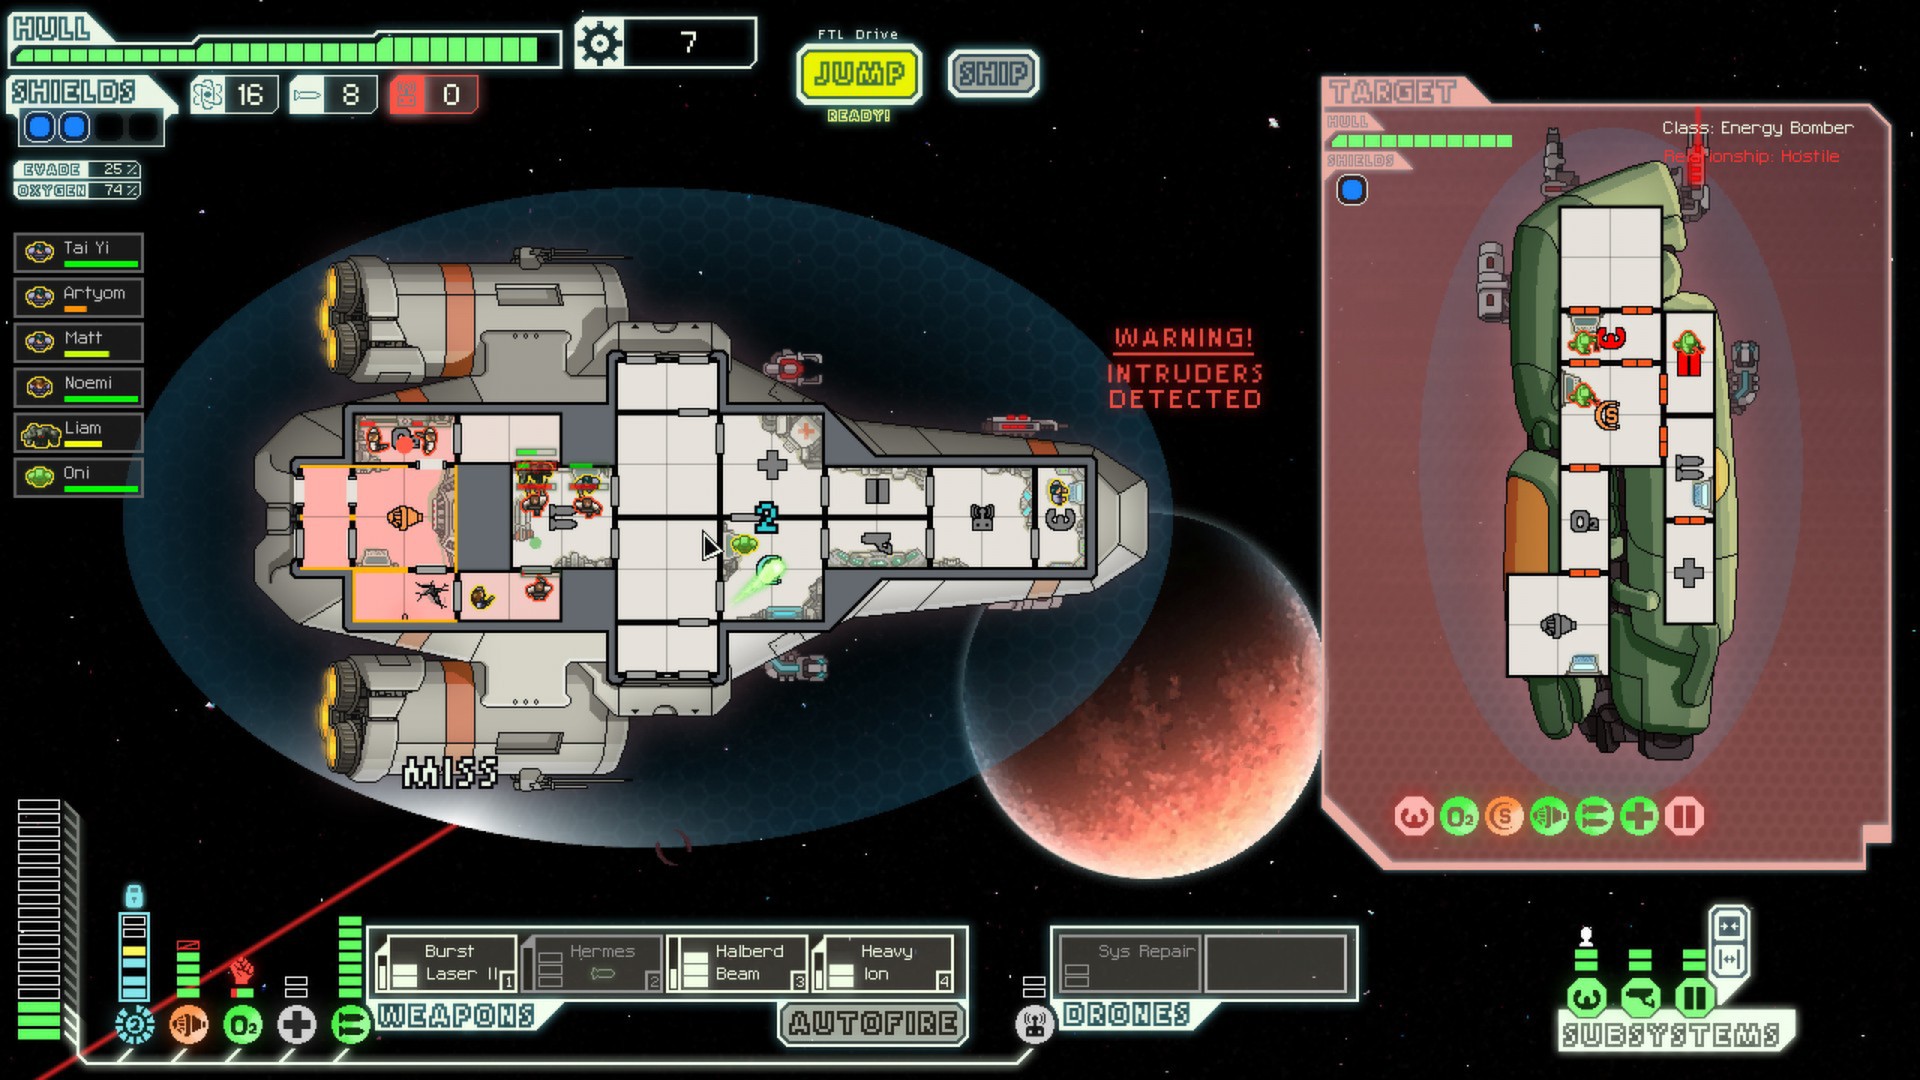 FTL: Faster Than Light Review (PC/Mac/Linux)